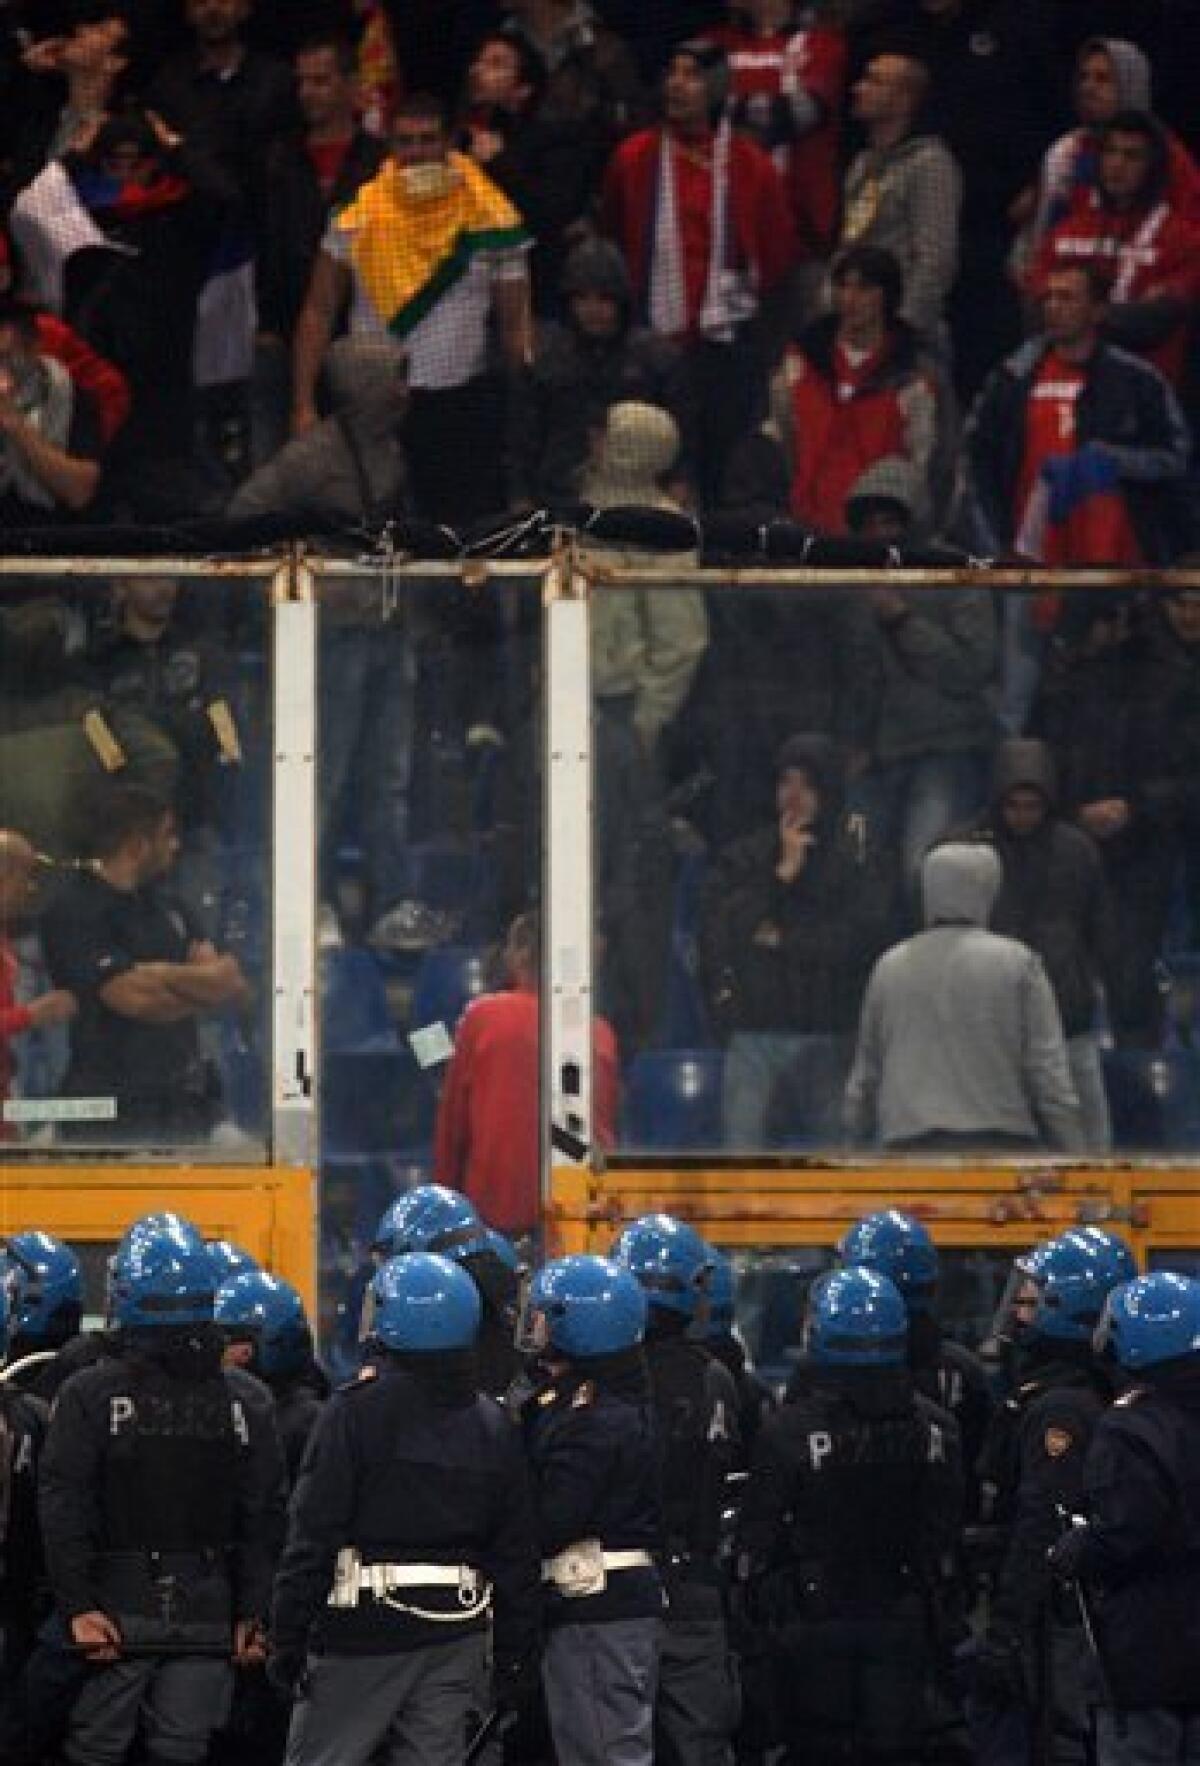 Italian police confront Serbia fans behind a partition prior to the start of a Group C, Euro 2012 qualifying soccer match between Italy and Serbia, at the Luigi Ferraris stadium in Genoa, Italy, Tuesday, Oct. 12, 2010. The Italy-Serbia European Championship qualifier was stopped after seven minutes of play on Tuesday after Serbia fans threw flares onto the pitch. (AP Photo/Antonio Calanni)